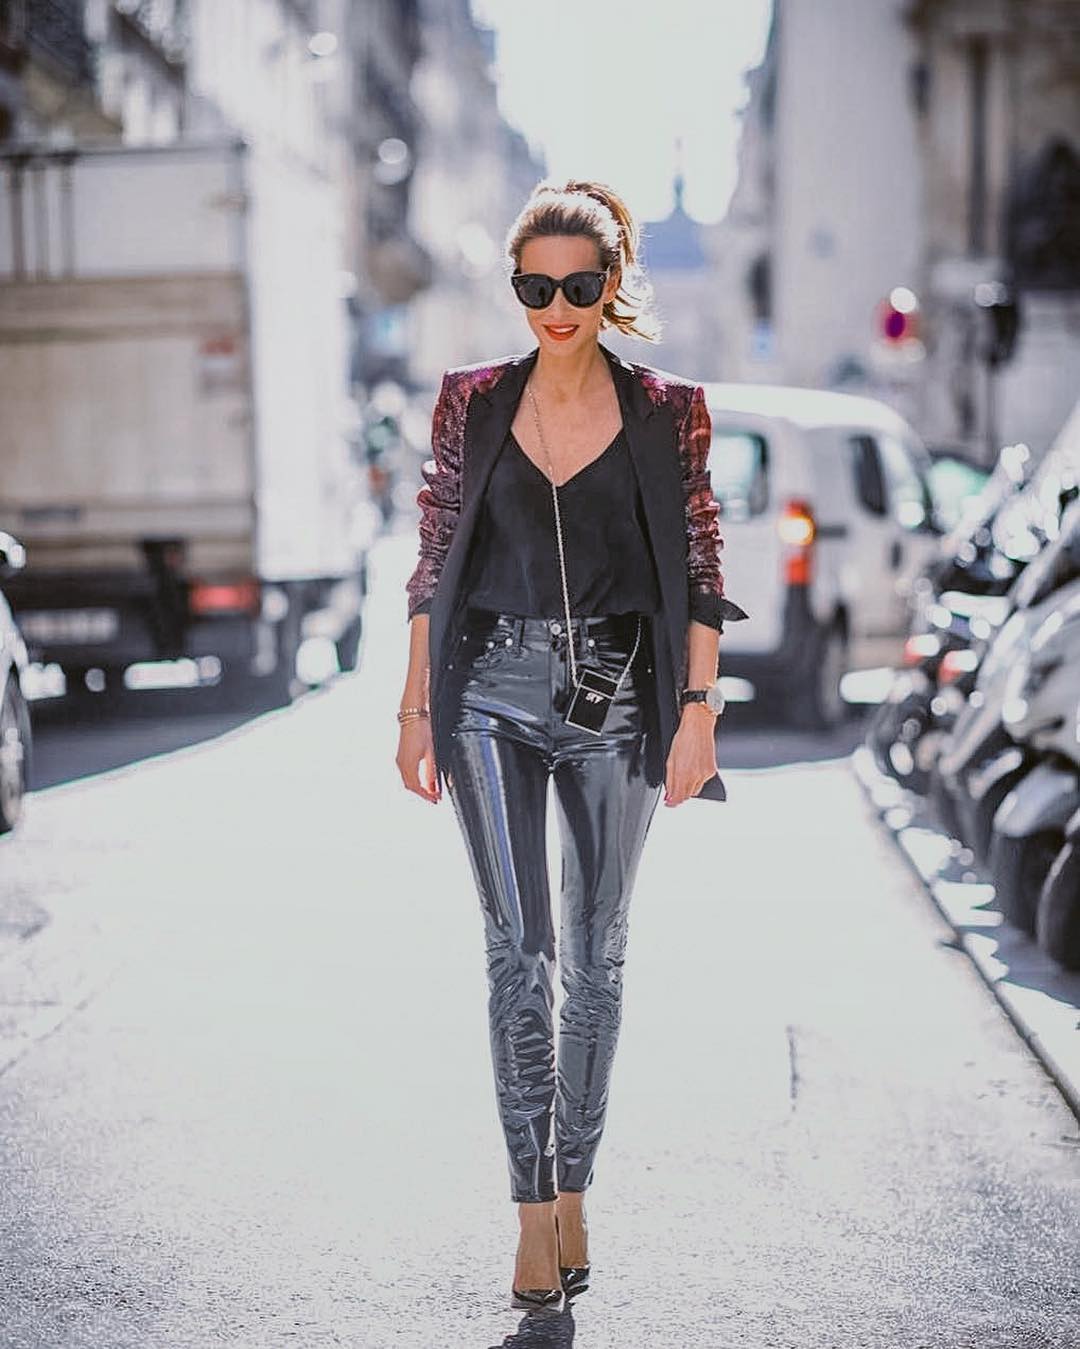 Velour Blazer And Patent Leather Pants
Outfit